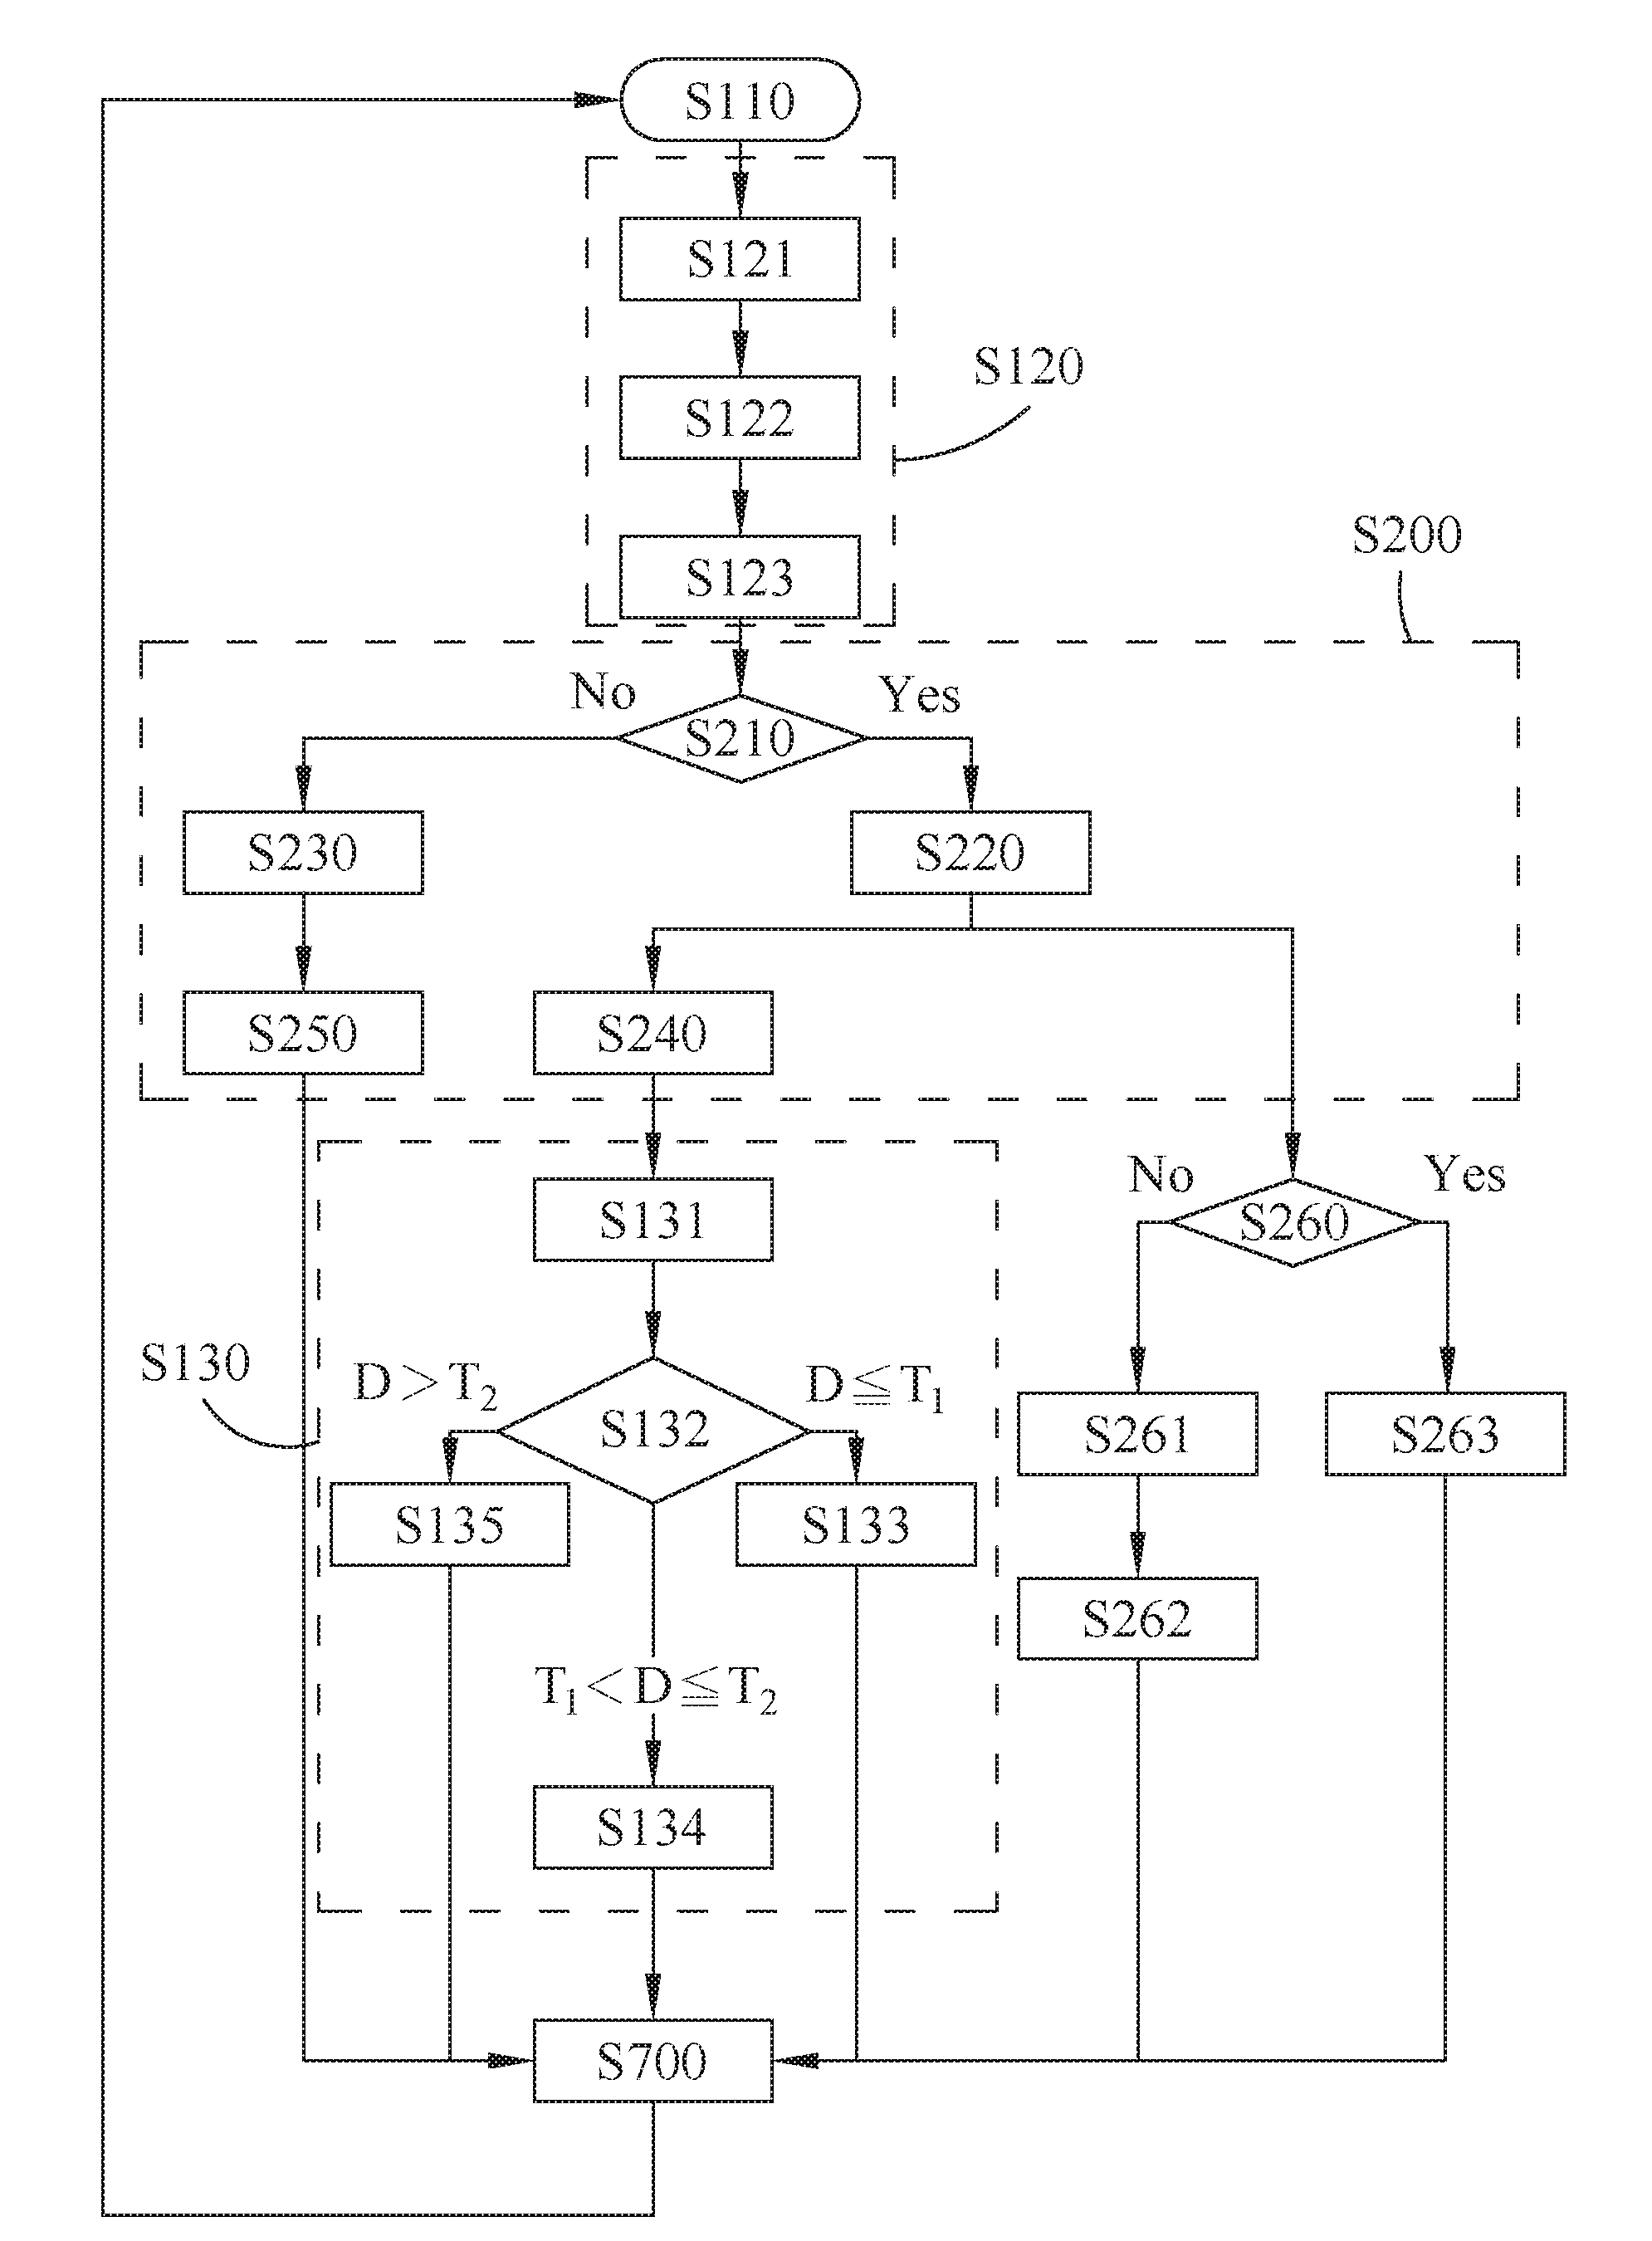 Non-contact method for detecting physiological signal and motion in real time